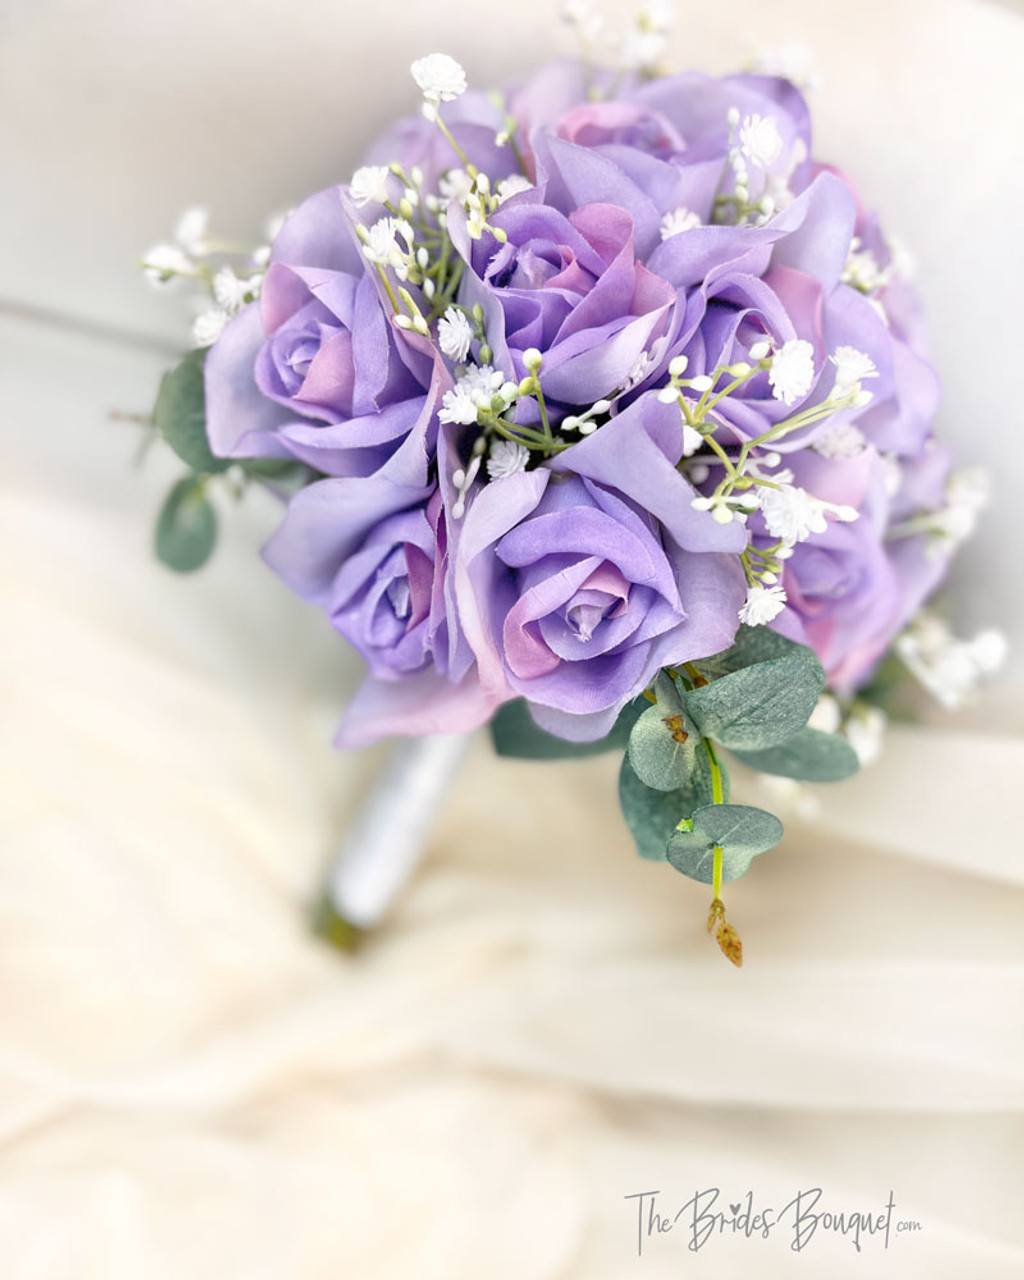 Small Lavender Bunches for small vases or wedding corsages